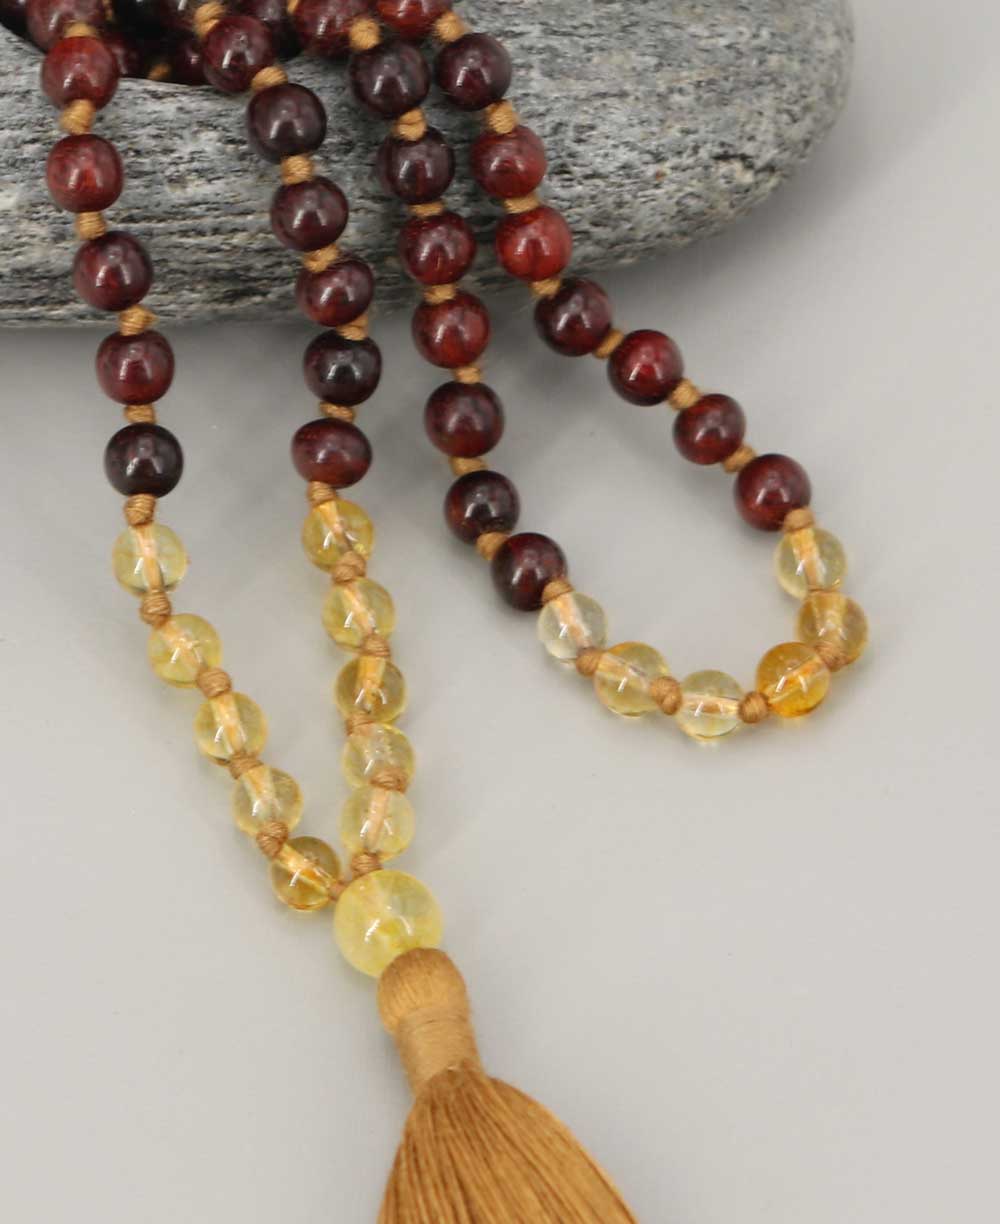 Rosewood and Citrine 108 Beads Meditation Mala, Knotted - Prayer Beads